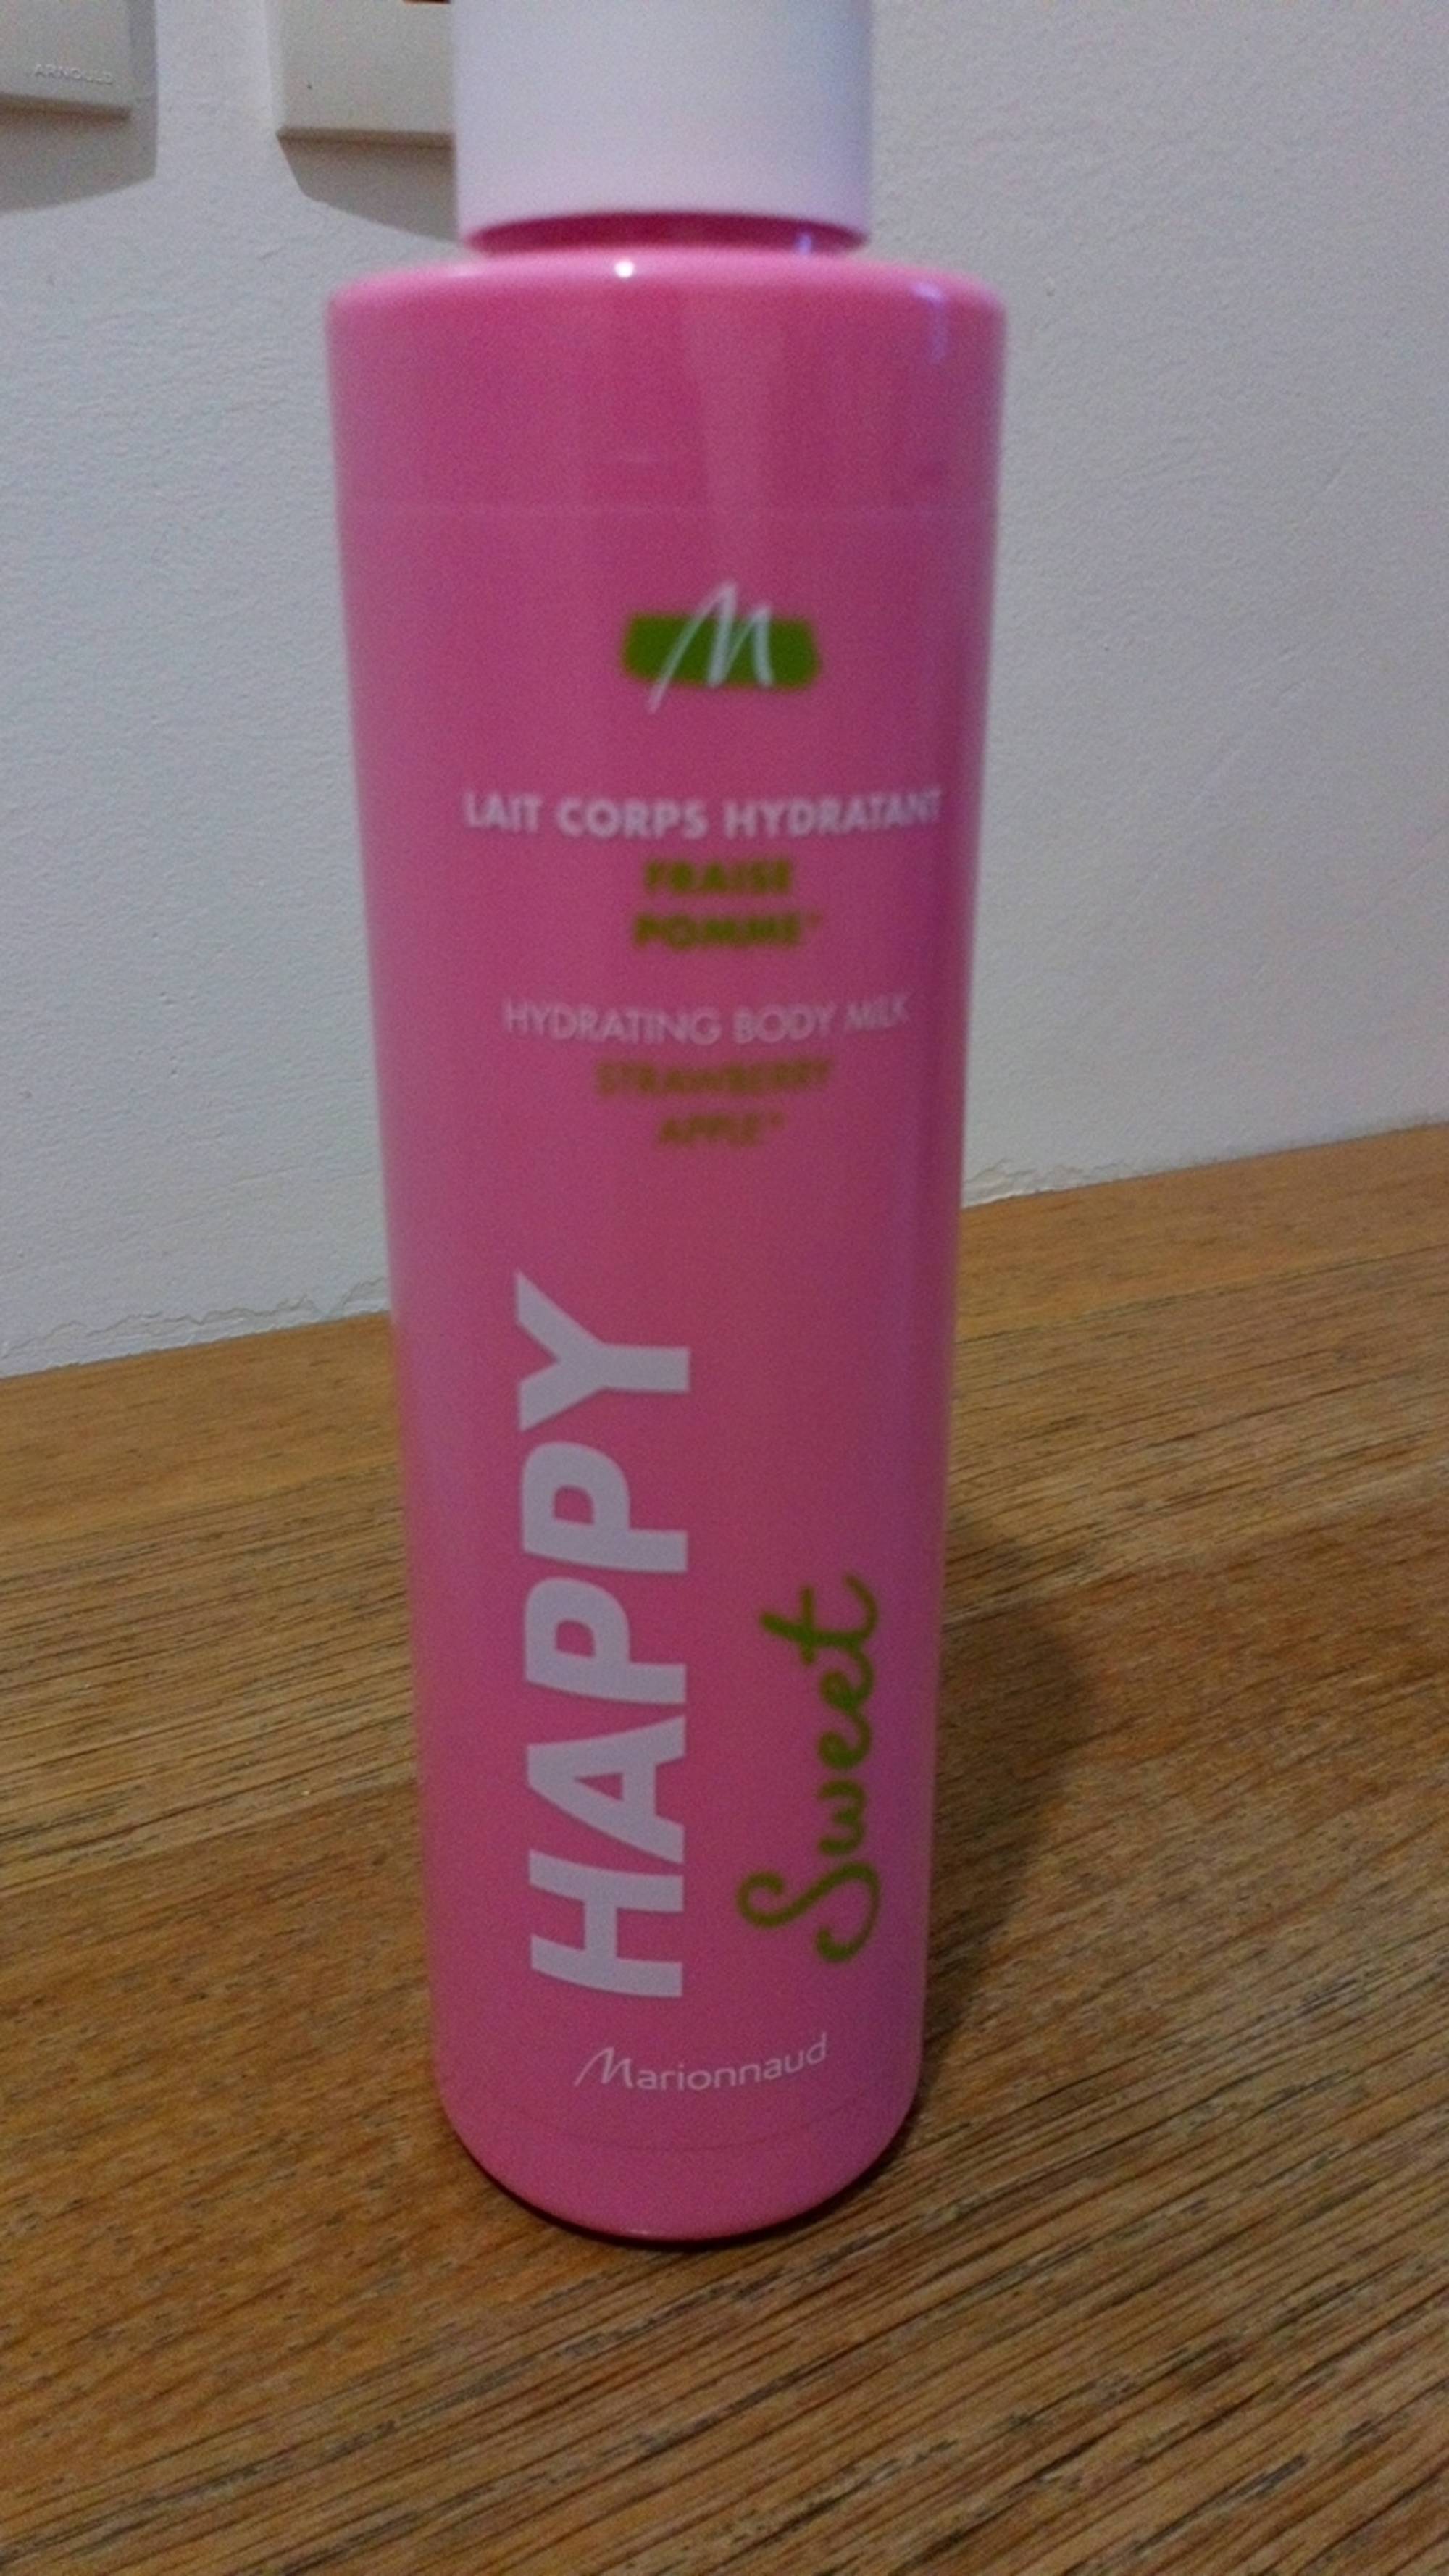 MARIONNAUD - Happy Sweet - Lait corps hydratant